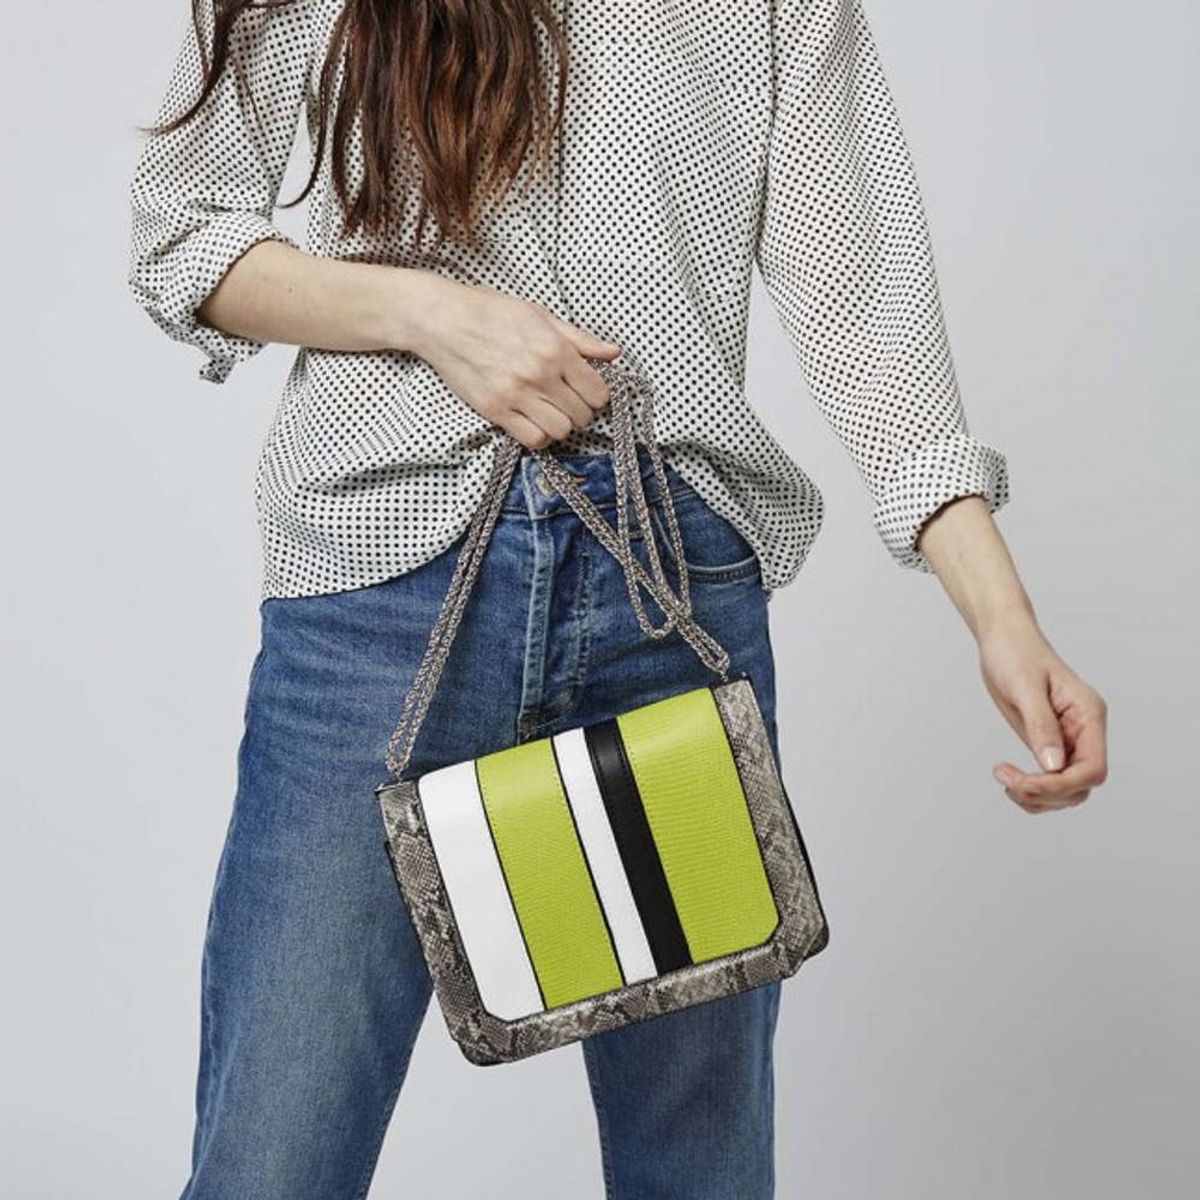 21 Trendy New Bags to Dress Up Your Spring Outfit - Brit + Co